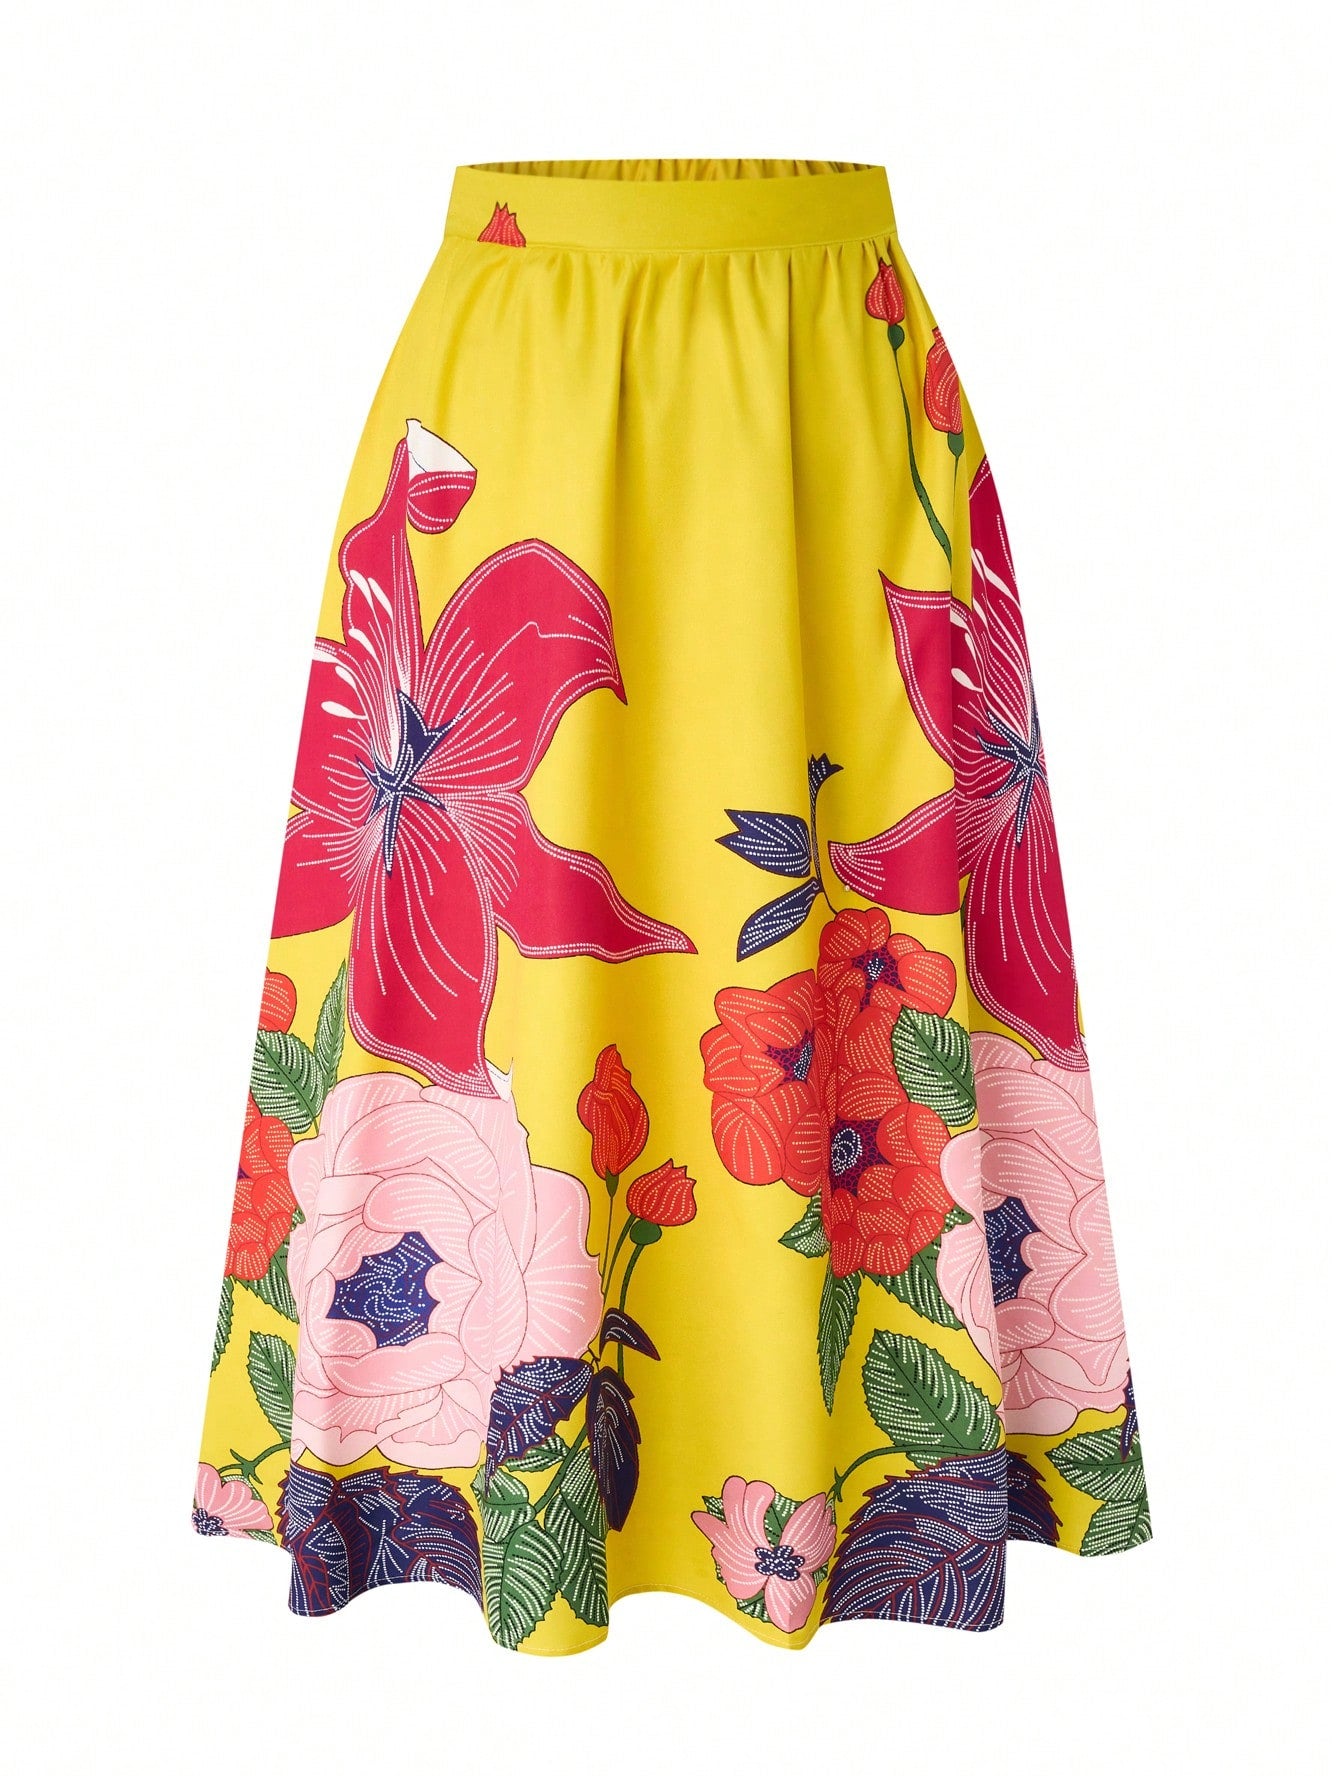 Plus Size Floral Printed Skirt